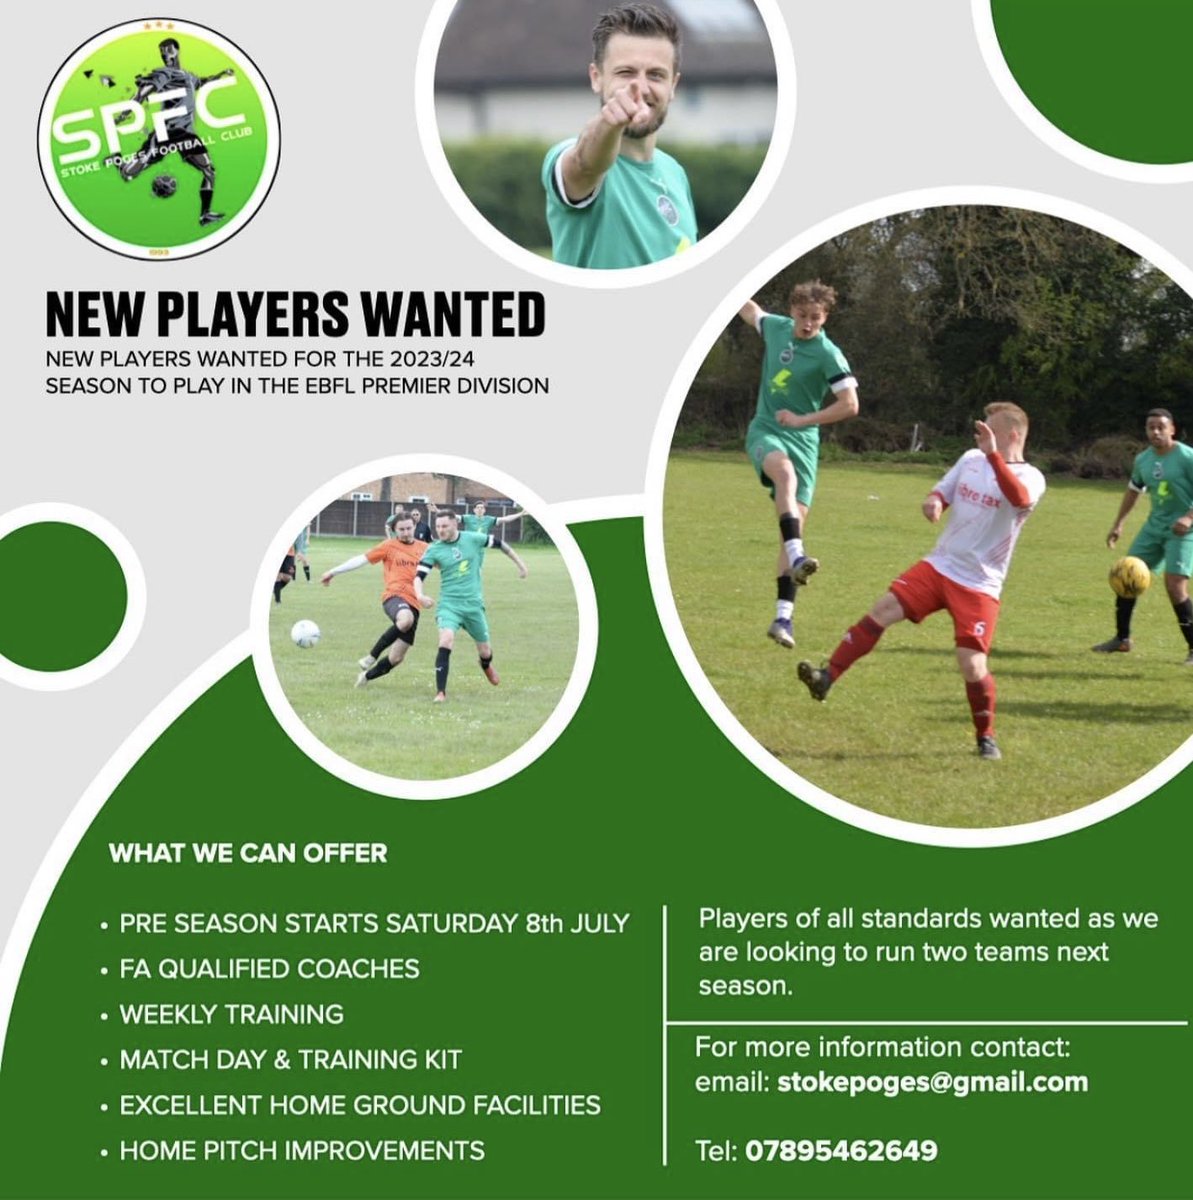 ⚽️After a successful 2022/23 season we are looking for new players to play in one of our two teams 🟢Players of all standards welcome⚫️ 📱07895 462649 or DM for details